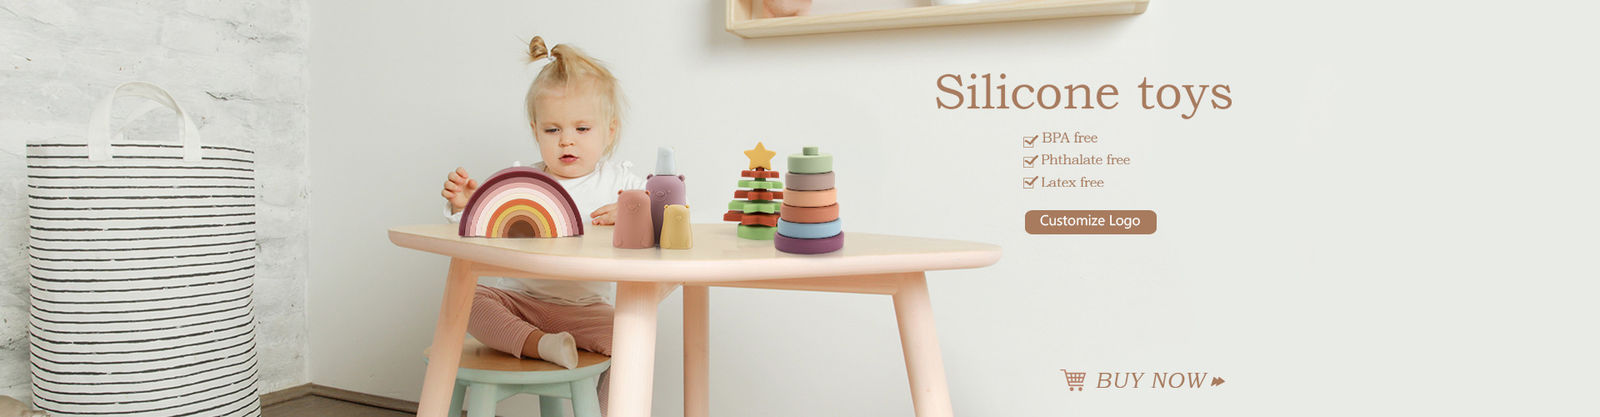 Baby Silicone Toys